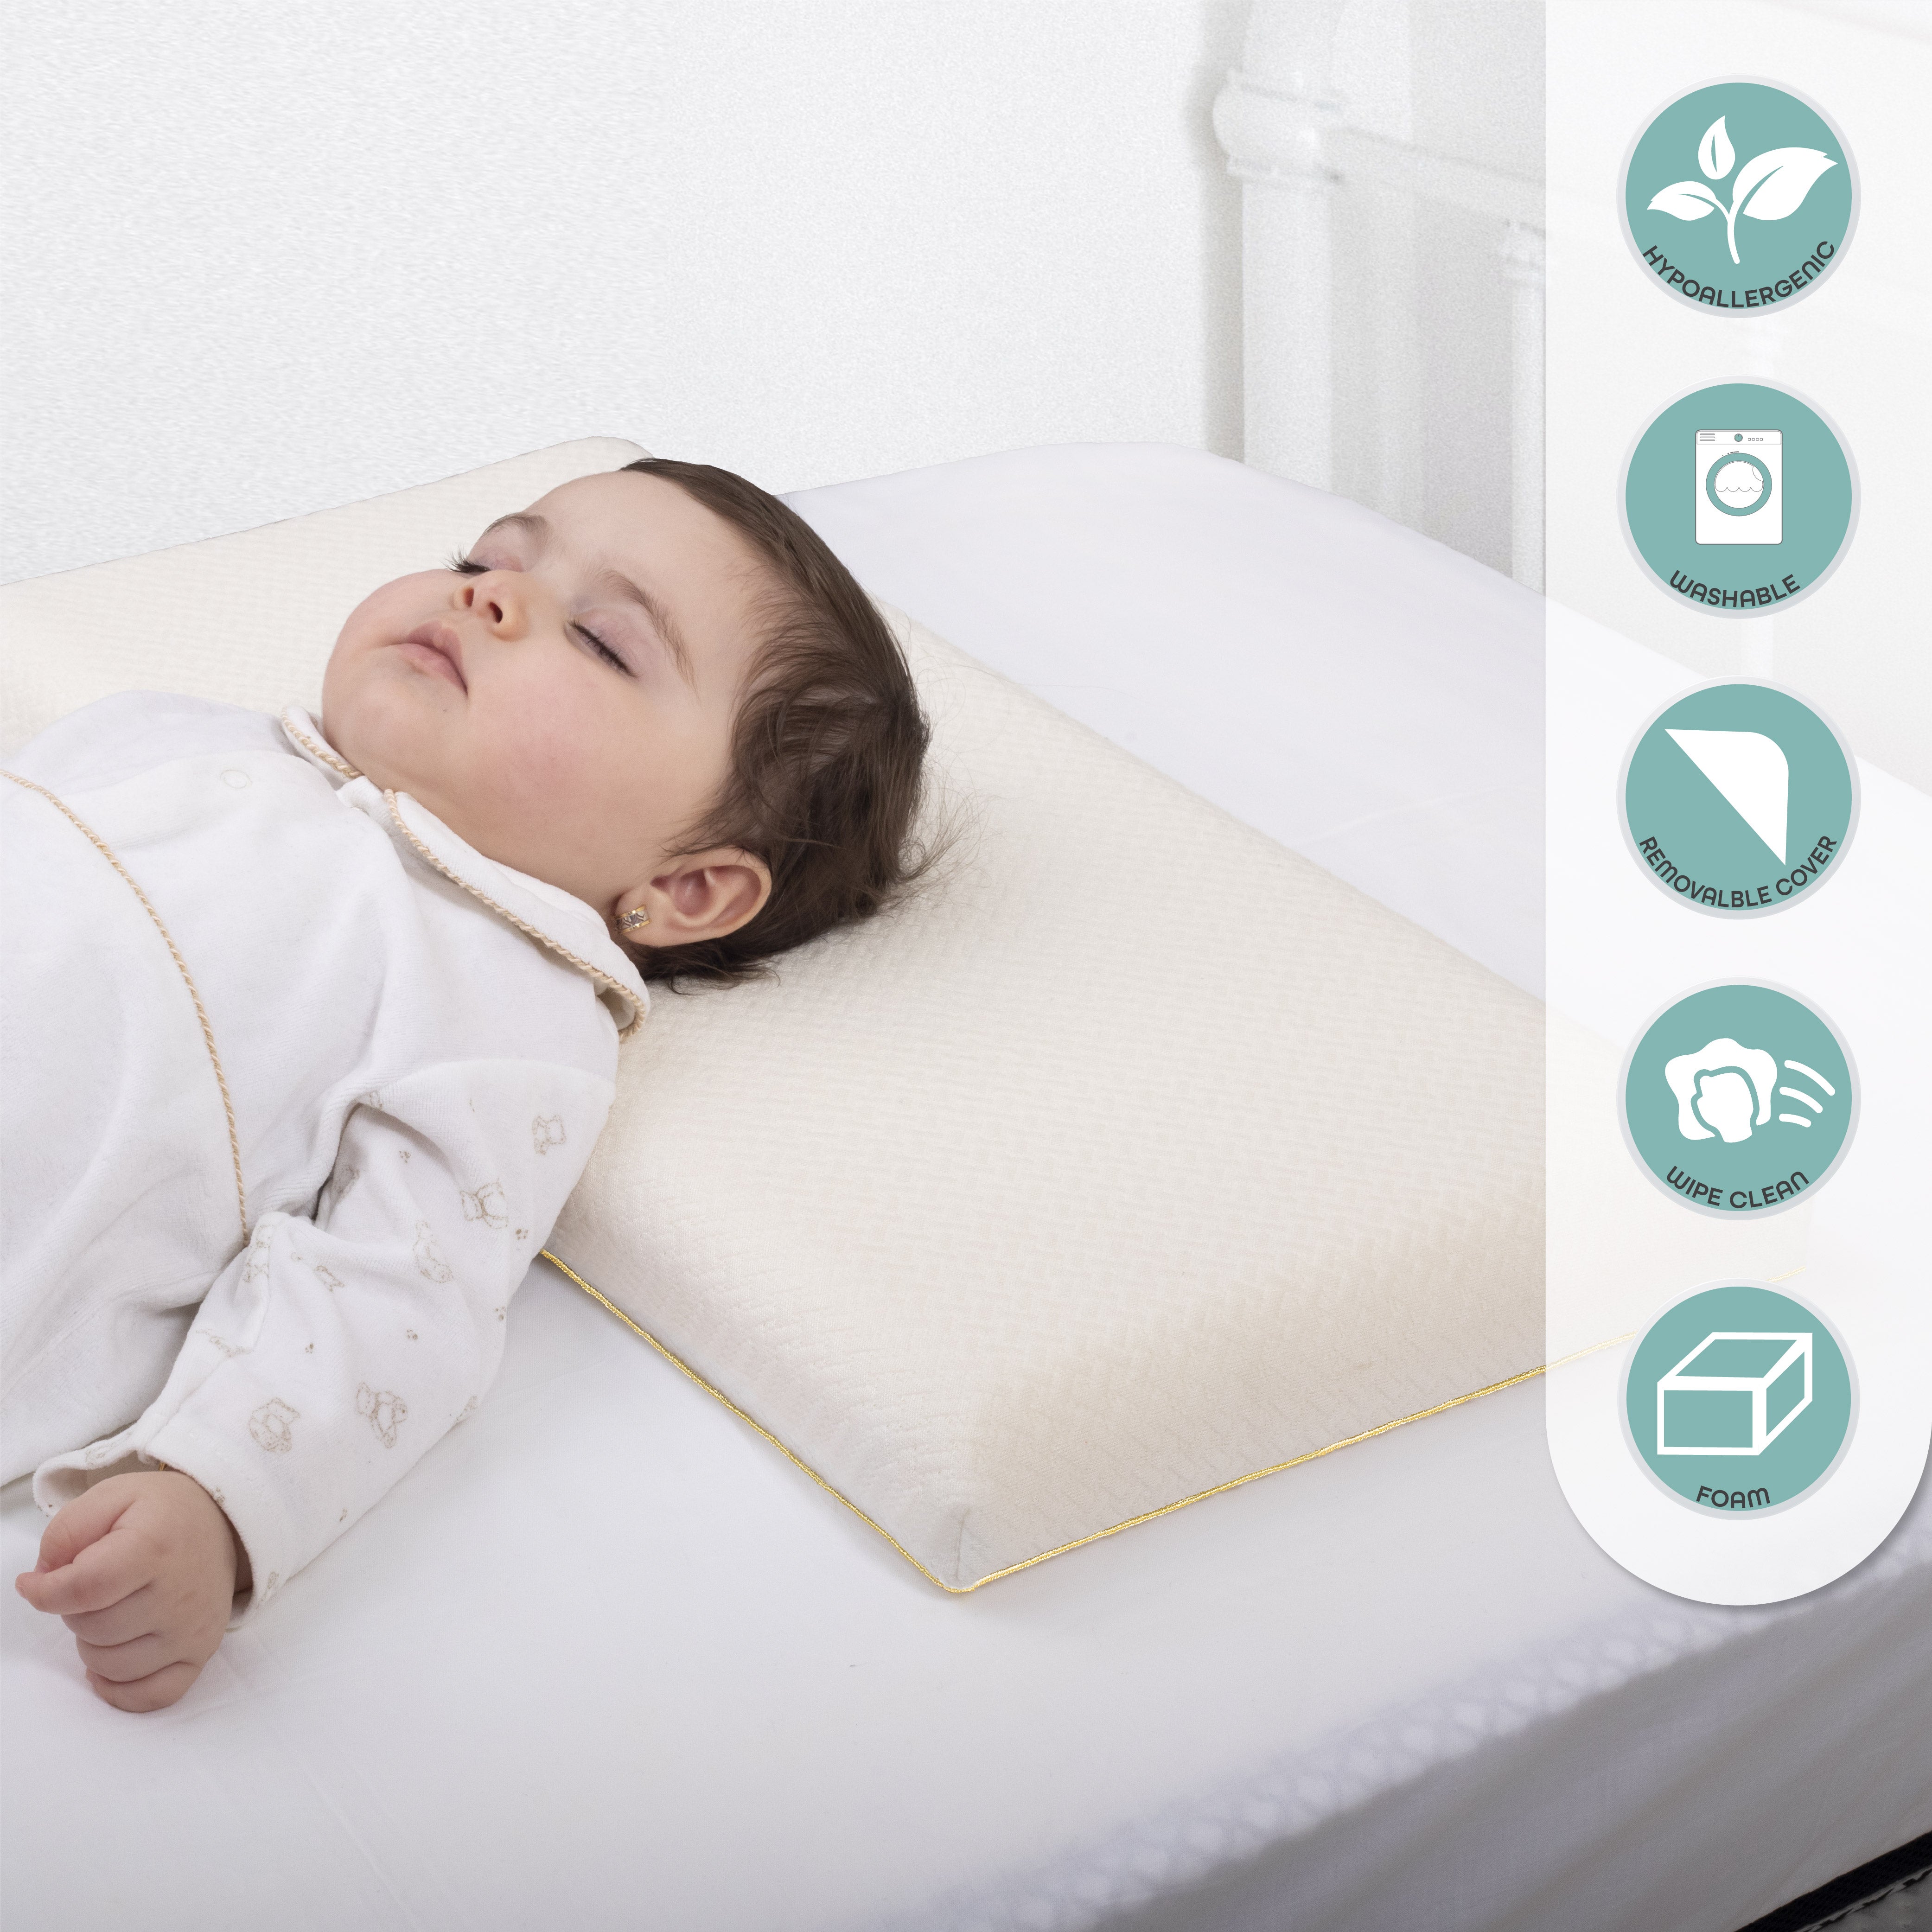 Moon - Organic First Baby Pillow (White)